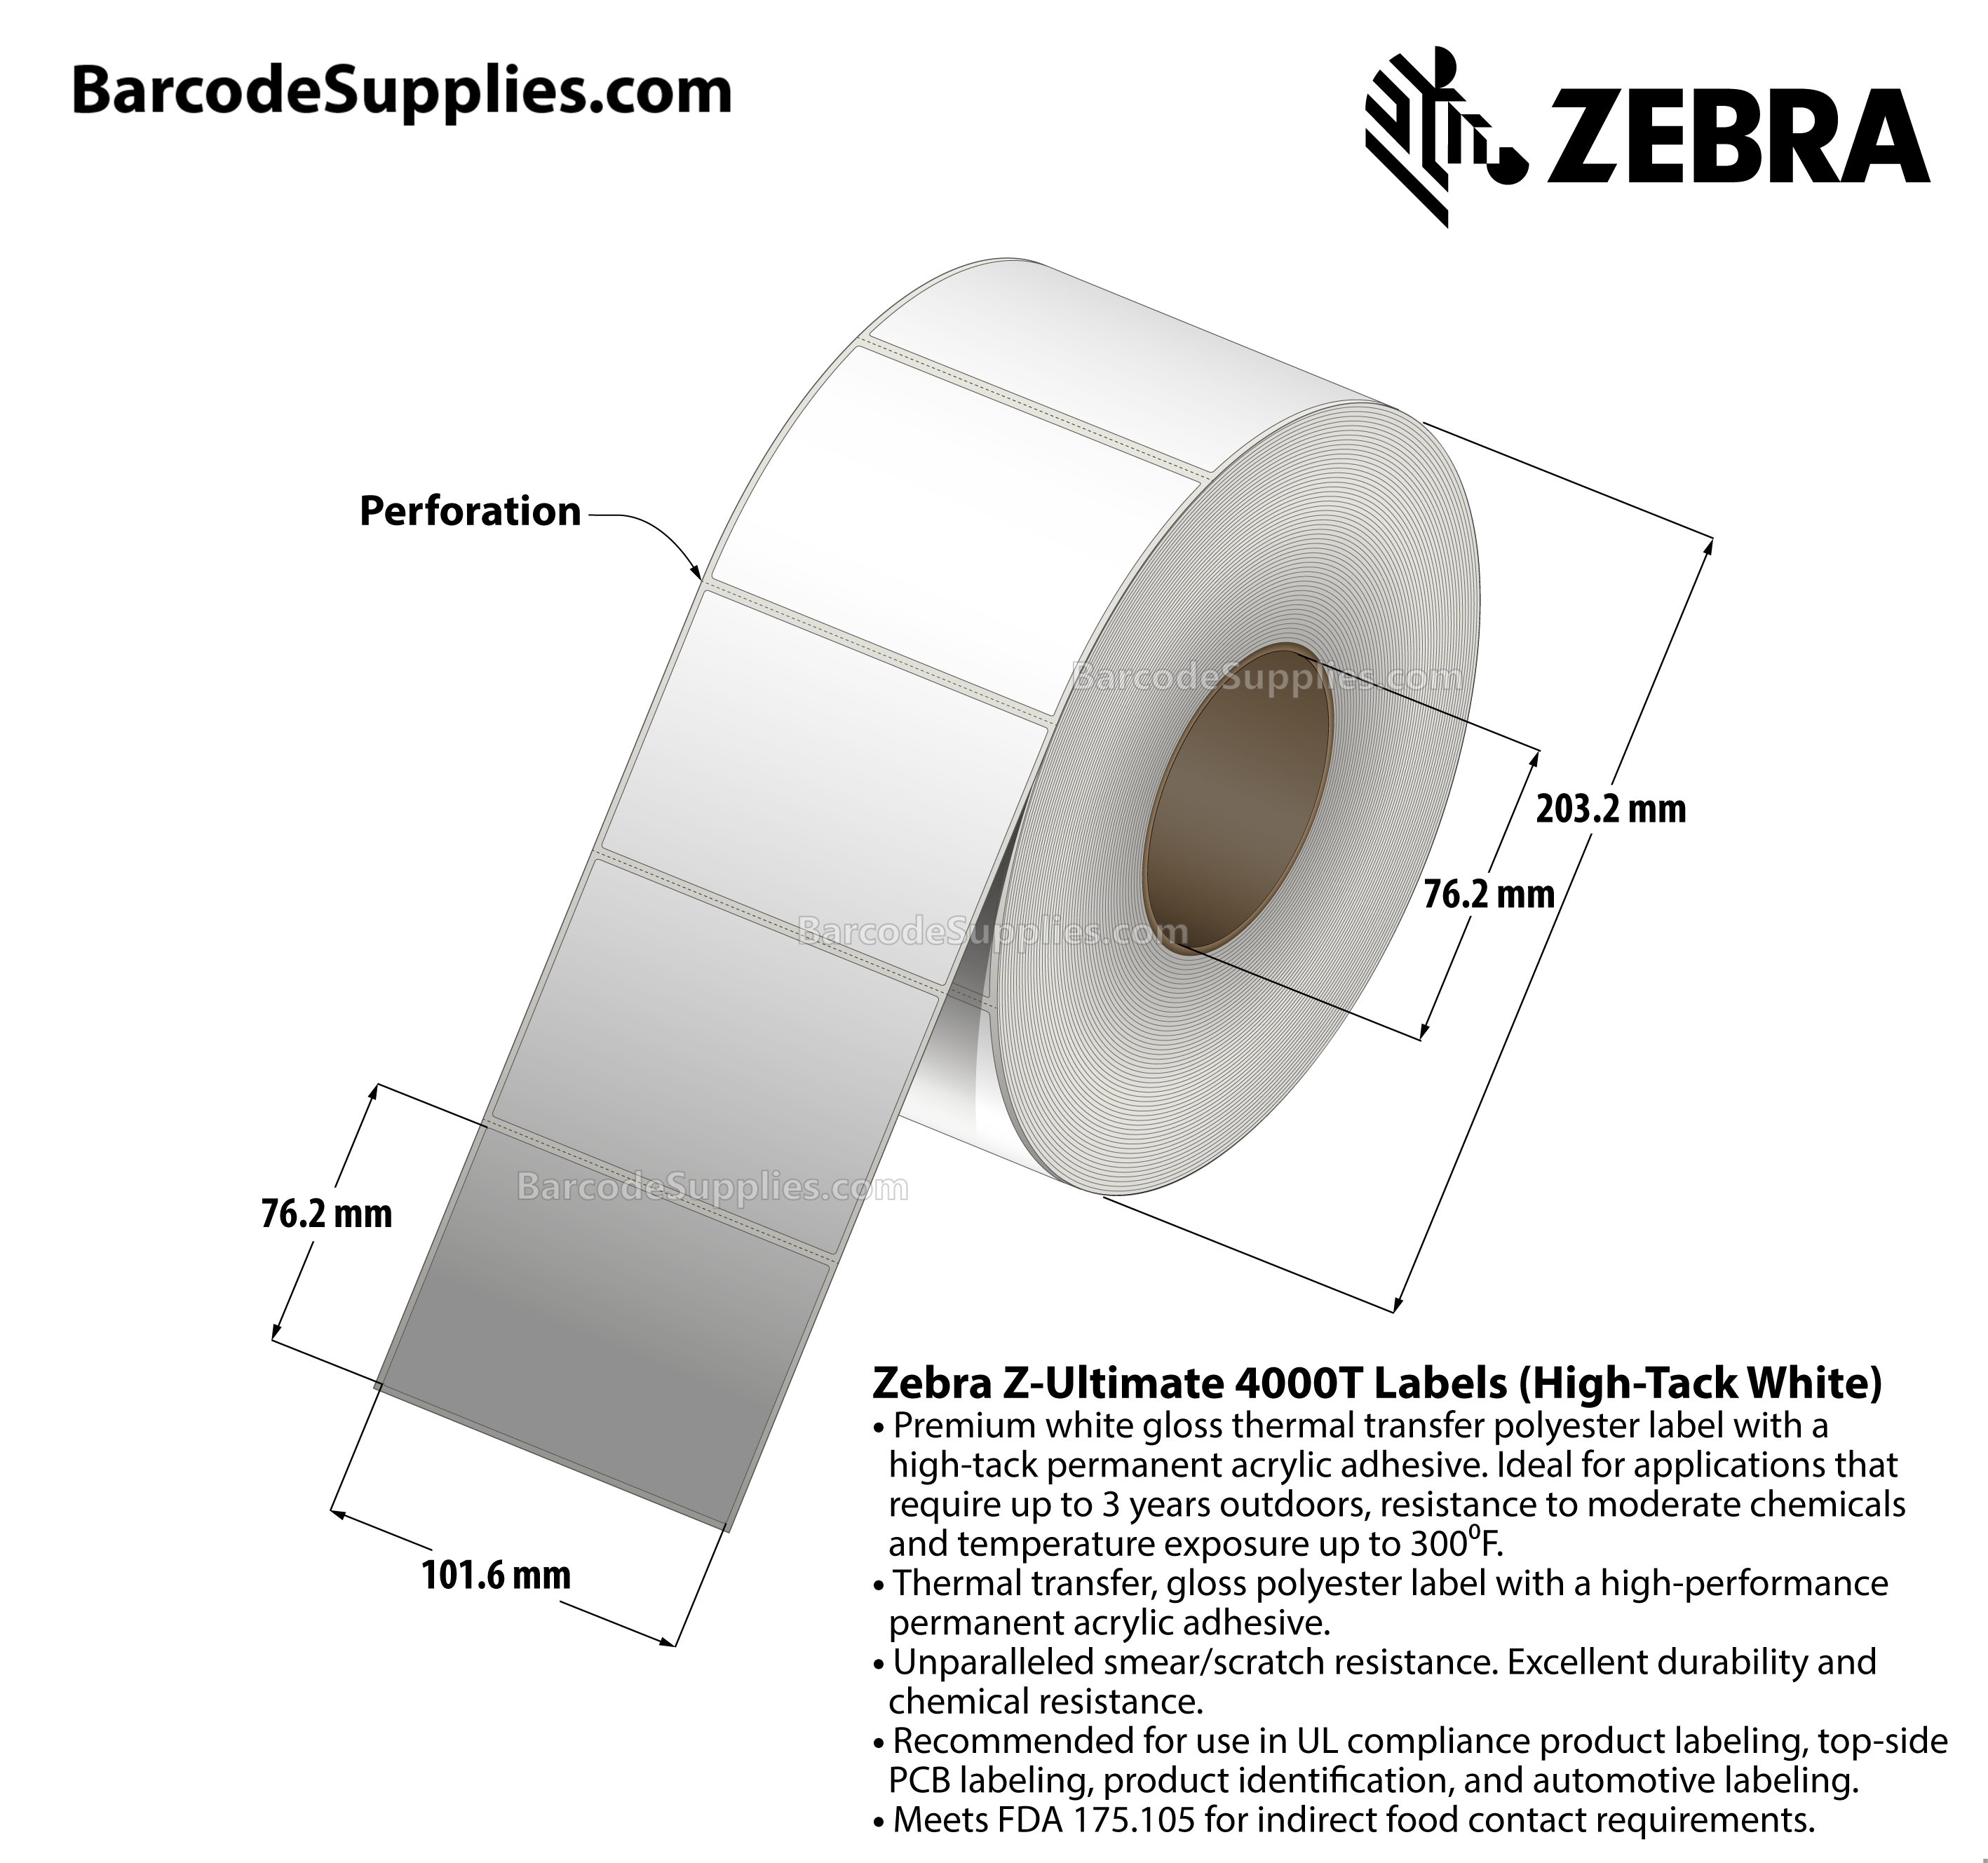 4 x 3 Thermal Transfer White Z-Ultimate 4000T High-Tack White Labels With High-tack Adhesive - Perforated - 1000 Labels Per Roll - Carton Of 1 Rolls - 1000 Labels Total - MPN: 10023061